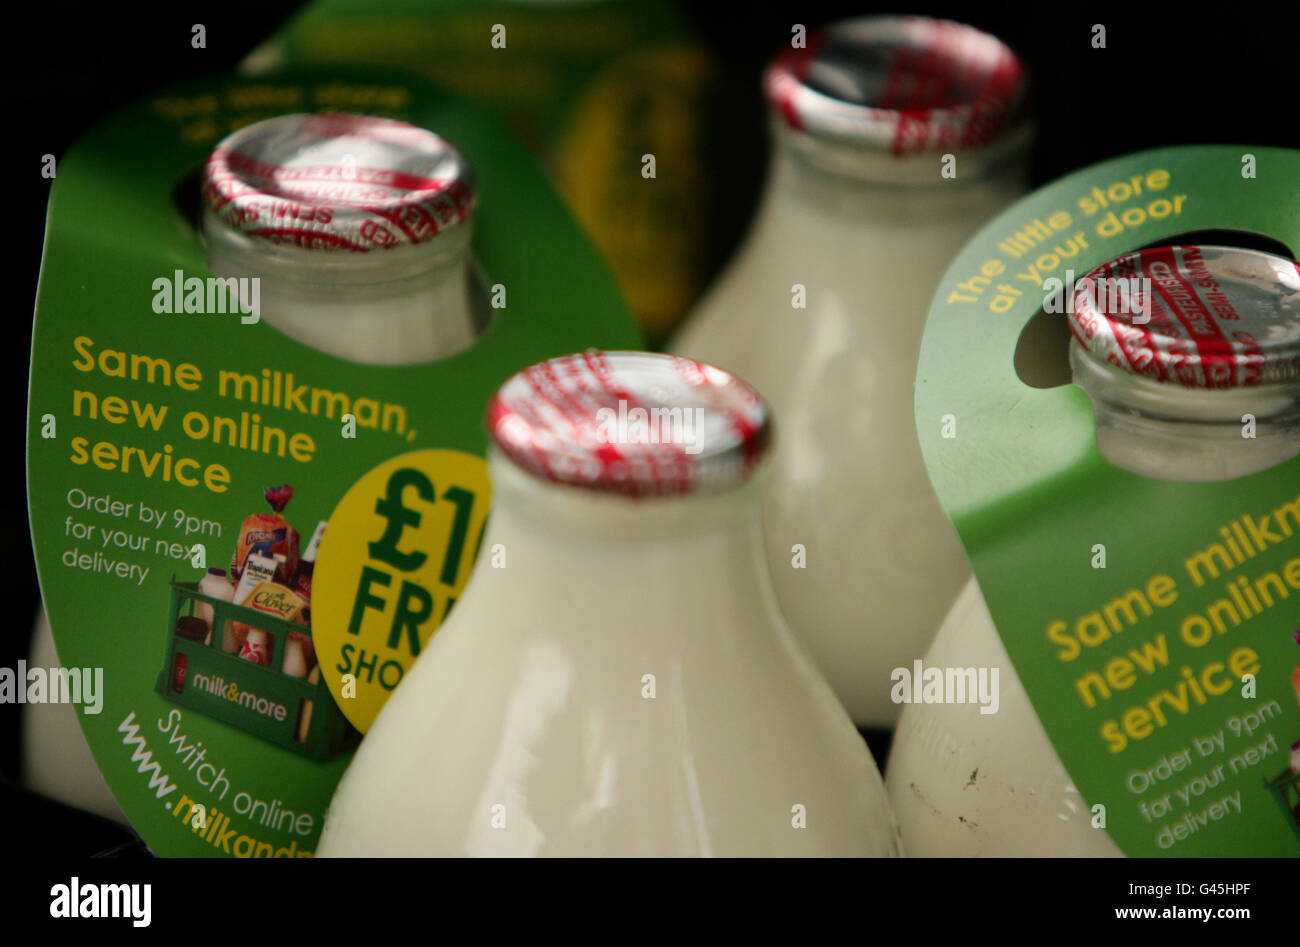 Labels on Dairy Crest milk promoting their online delivery service in Greater Manchester. Stock Photo